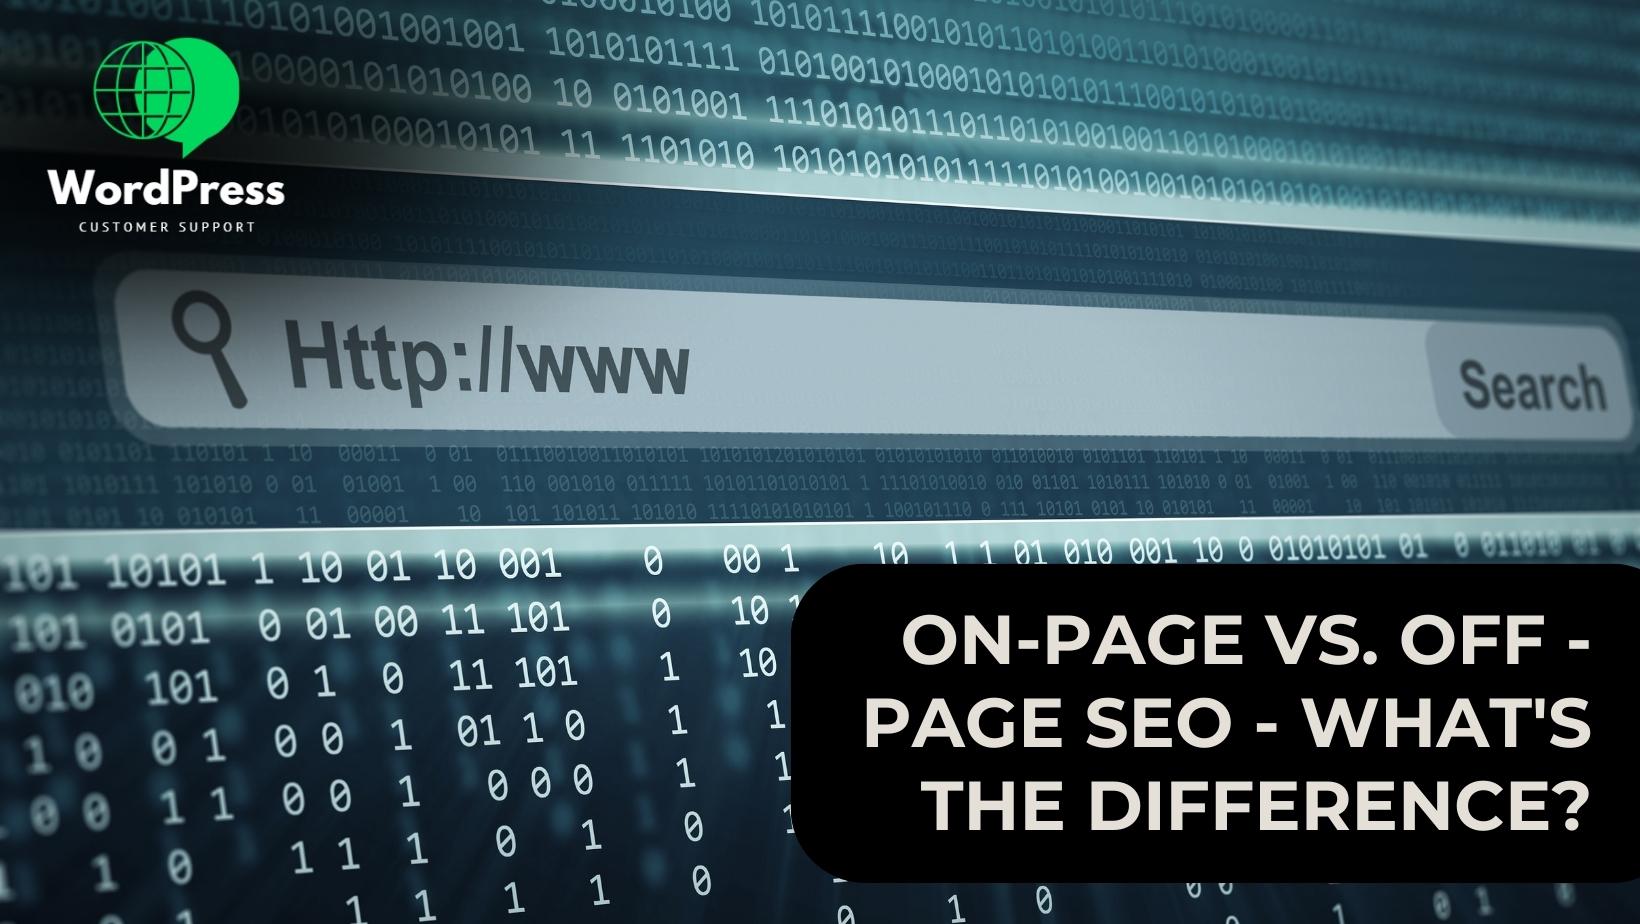 On-Page vs. Off-Page SEO – What’s the Difference?